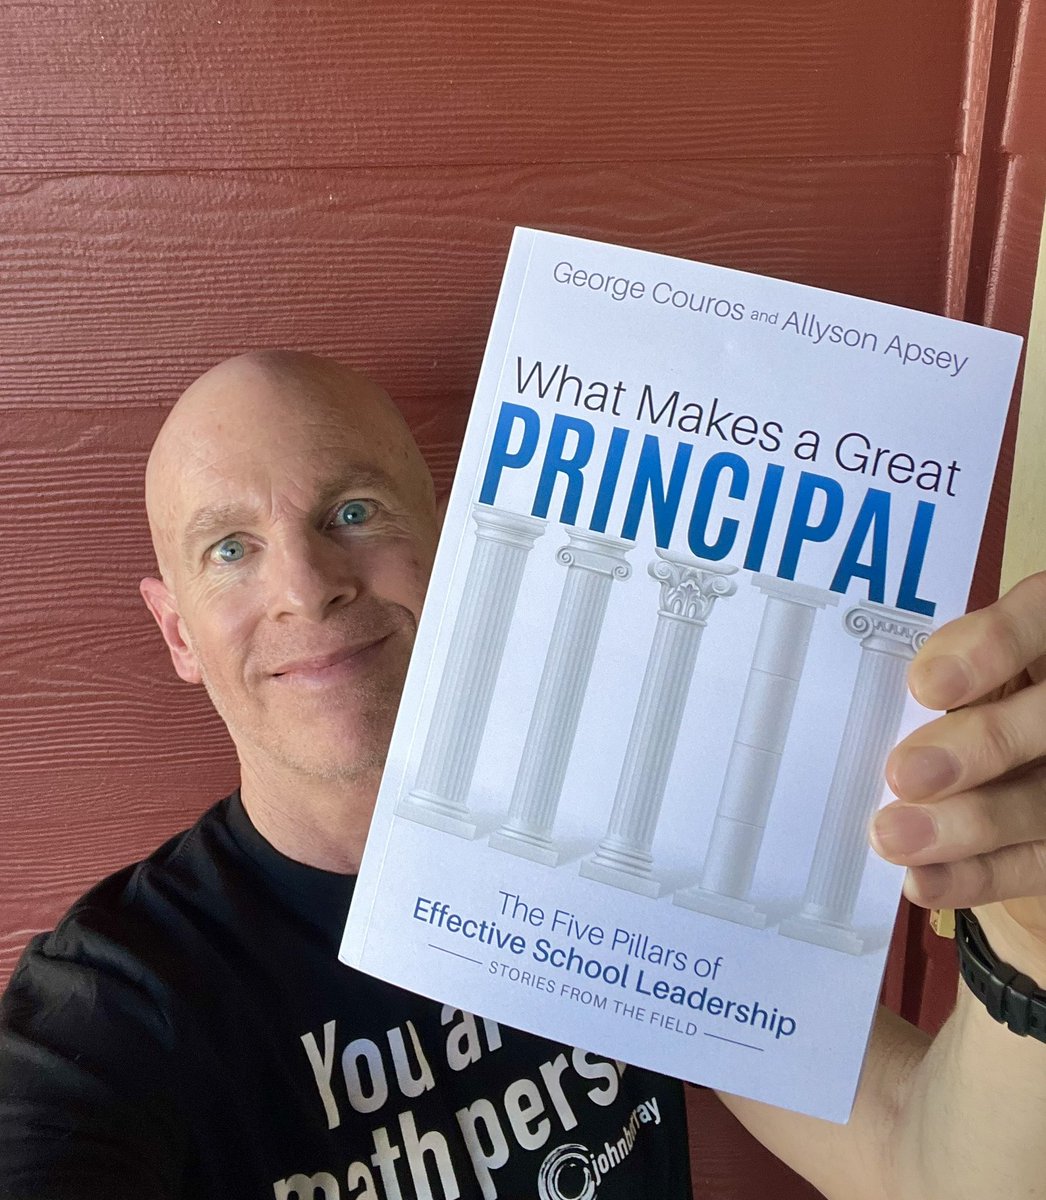 This project will have a far-reaching impact on how we view the principalship. Proud of @AllysonApsey & @gcouros for how powerfully they pulled this together. #WhatMakesAGreatPrincipal: The Five Pillars of Effective School Leadership a.co/d/0U5pUhM #tlap #leadlap